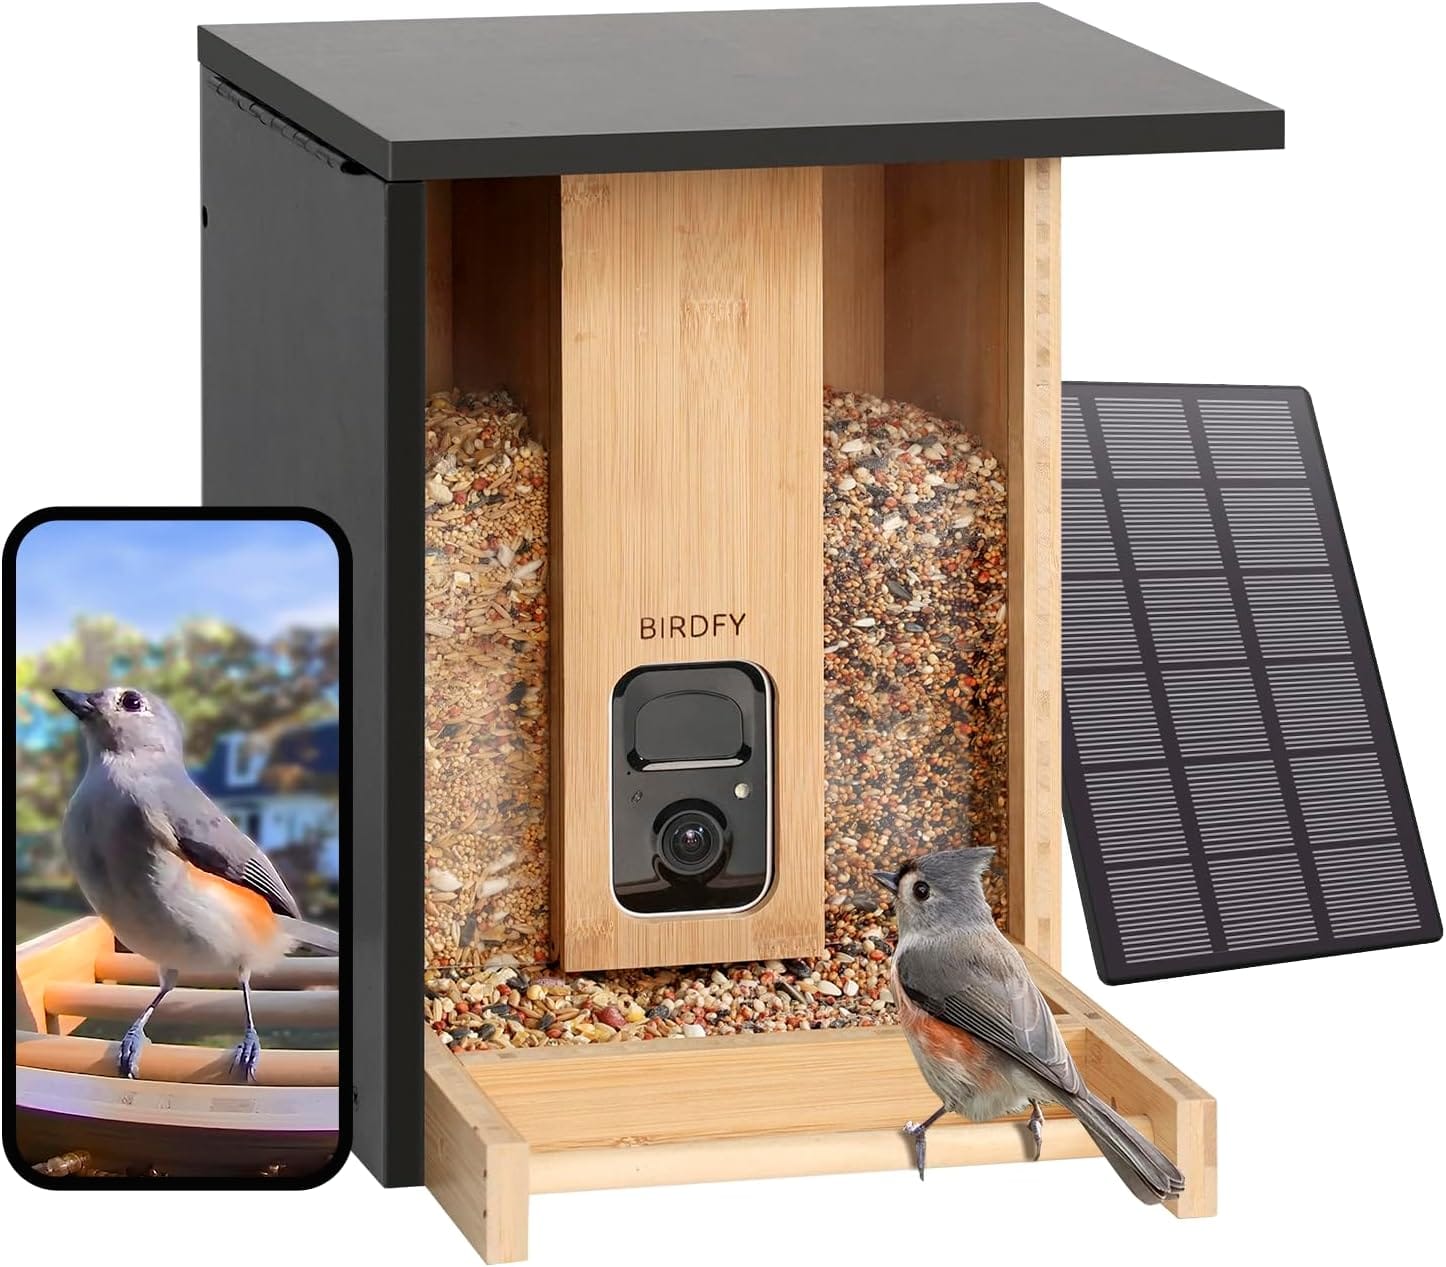 Revolutionize Your Bird-Watching Experience with these Best Smart AI Recognition Bird Feeder